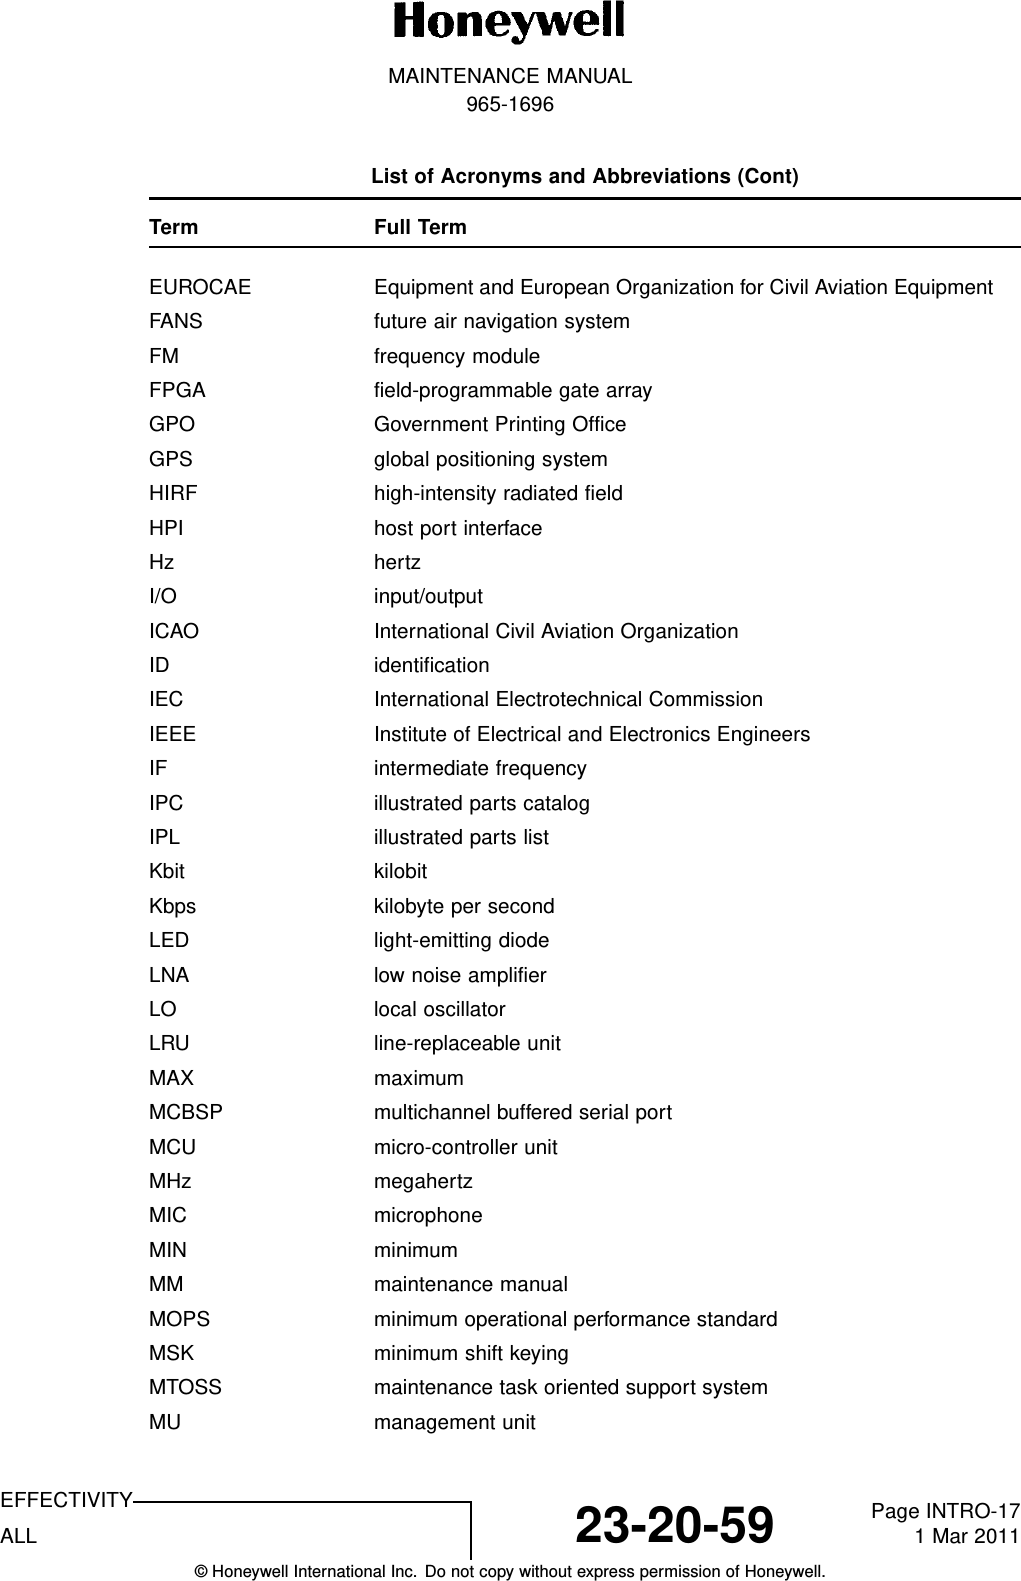 MAINTENANCE MANUAL965-1696List of Acronyms and Abbreviations (Cont)Term Full TermEUROCAE Equipment and European Organization for Civil Aviation EquipmentFANS future air navigation systemFM frequency moduleFPGA field-programmable gate arrayGPO Government Printing OfficeGPS global positioning systemHIRF high-intensity radiated fieldHPI host port interfaceHz hertzI/O input/outputICAO International Civil Aviation OrganizationID identificationIEC International Electrotechnical CommissionIEEE Institute of Electrical and Electronics EngineersIF intermediate frequencyIPC illustrated parts catalogIPL illustrated parts listKbit kilobitKbps kilobyte per secondLED light-emitting diodeLNA low noise amplifierLO local oscillatorLRU line-replaceable unitMAX maximumMCBSP multichannel buffered serial portMCU micro-controller unitMHz megahertzMIC microphoneMIN minimumMM maintenance manualMOPS minimum operational performance standardMSK minimum shift keyingMTOSS maintenance task oriented support systemMU management unitEFFECTIVITYALL 23-20-59 Page INTRO-171 Mar 2011© Honeywell International Inc. Do not copy without express permission of Honeywell.